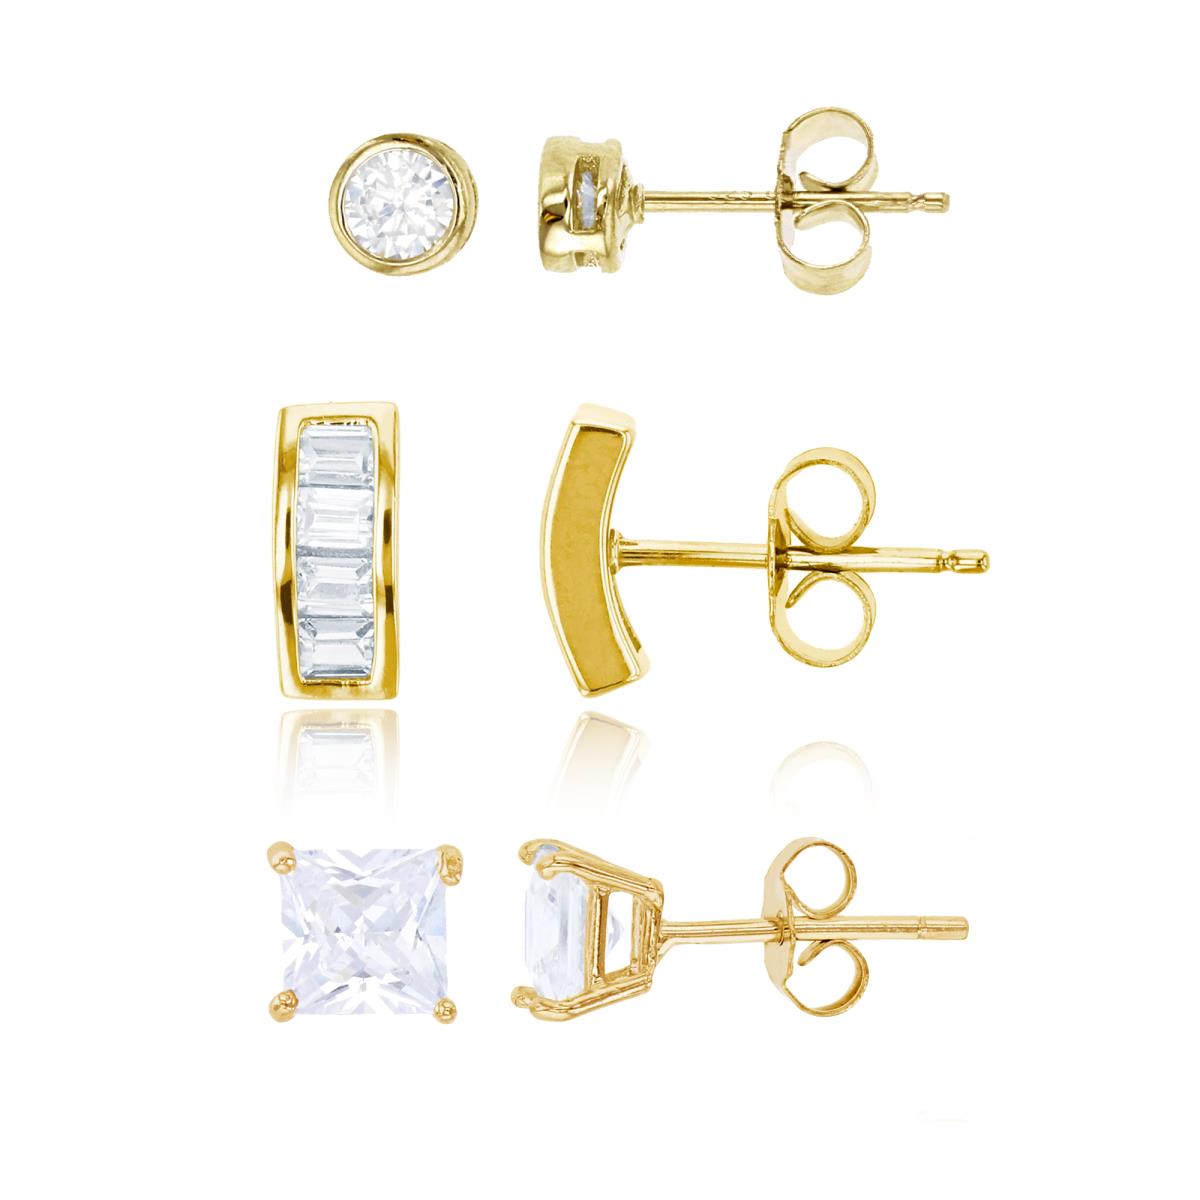 Sterling Silver Yellow Pave Baguette CZ, 4mm Rd Bezel & 5mm Square Solitaire Stud Earring Set